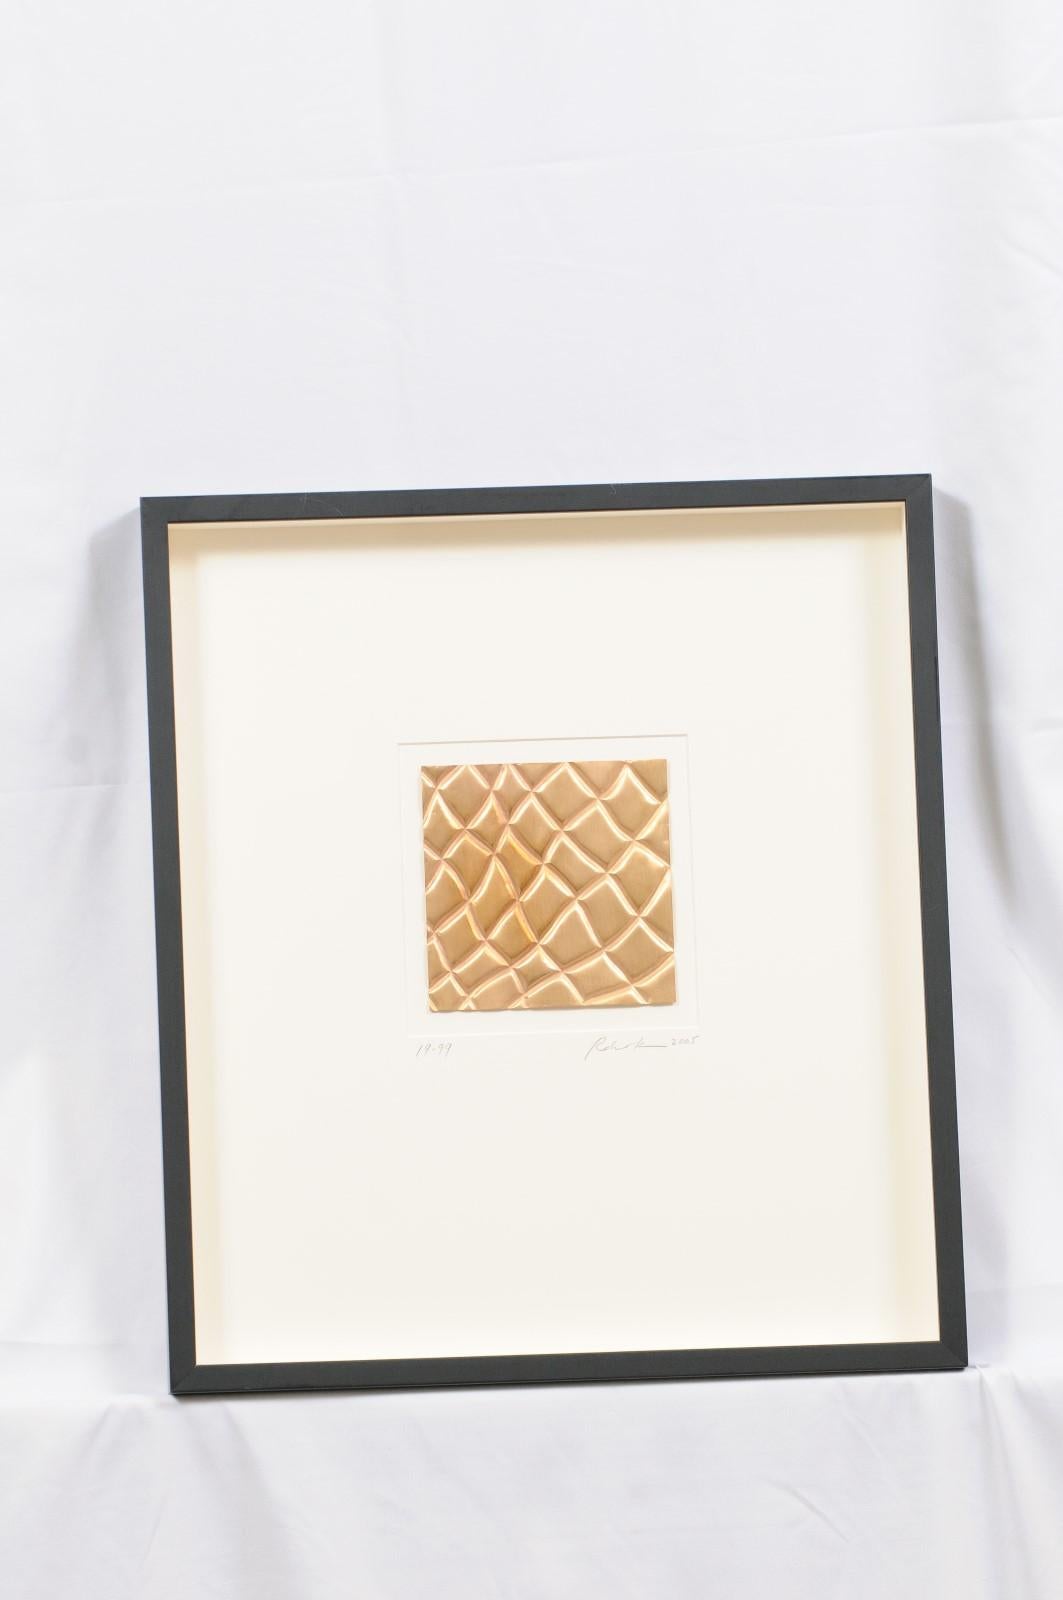 Black Framed Square Gold Textured Art - Robert Kuo In Good Condition For Sale In Atlanta, GA